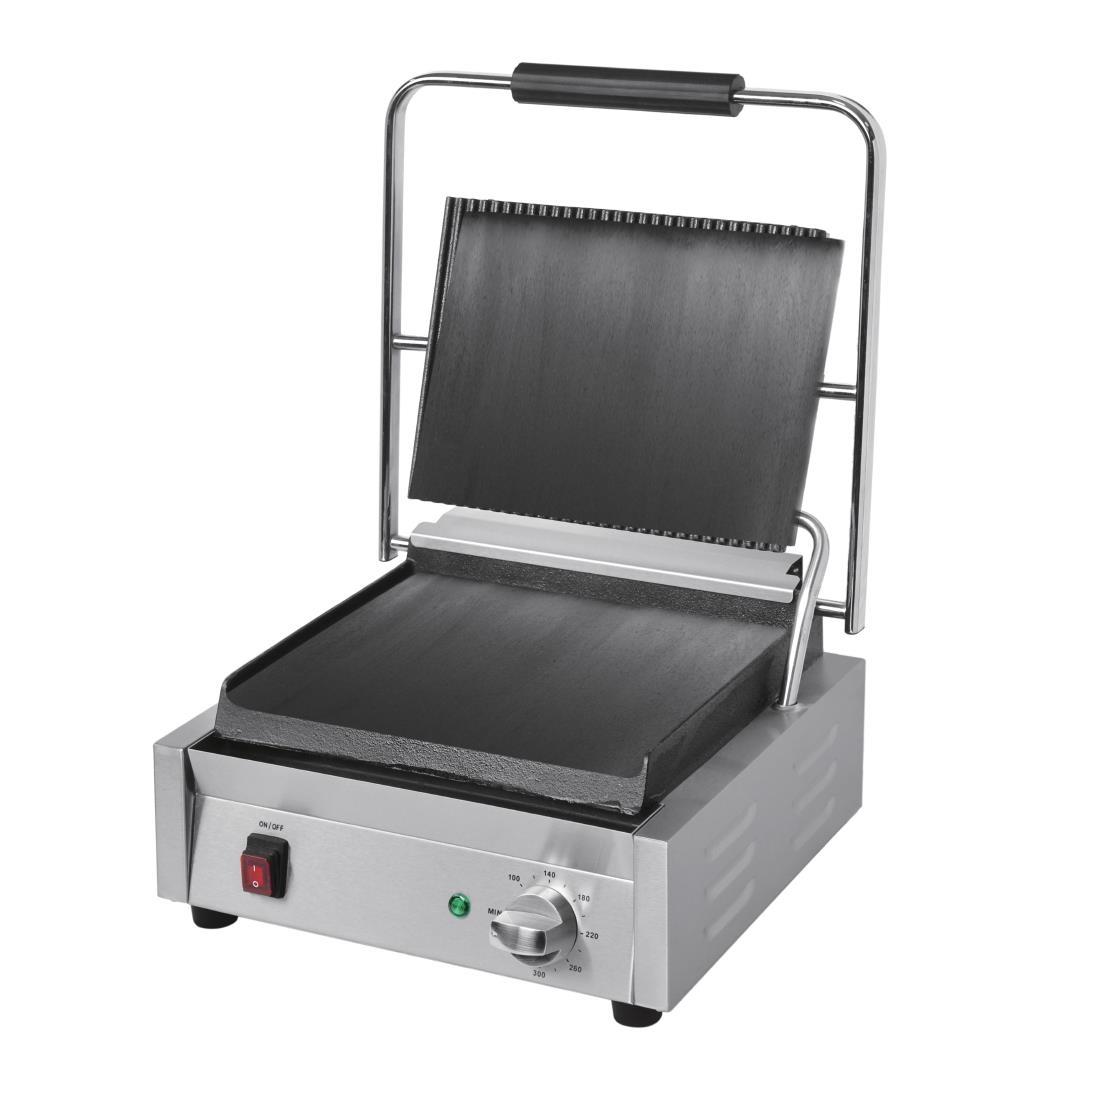 Buffalo Bistro Large Contact Grill - DY997  - 7